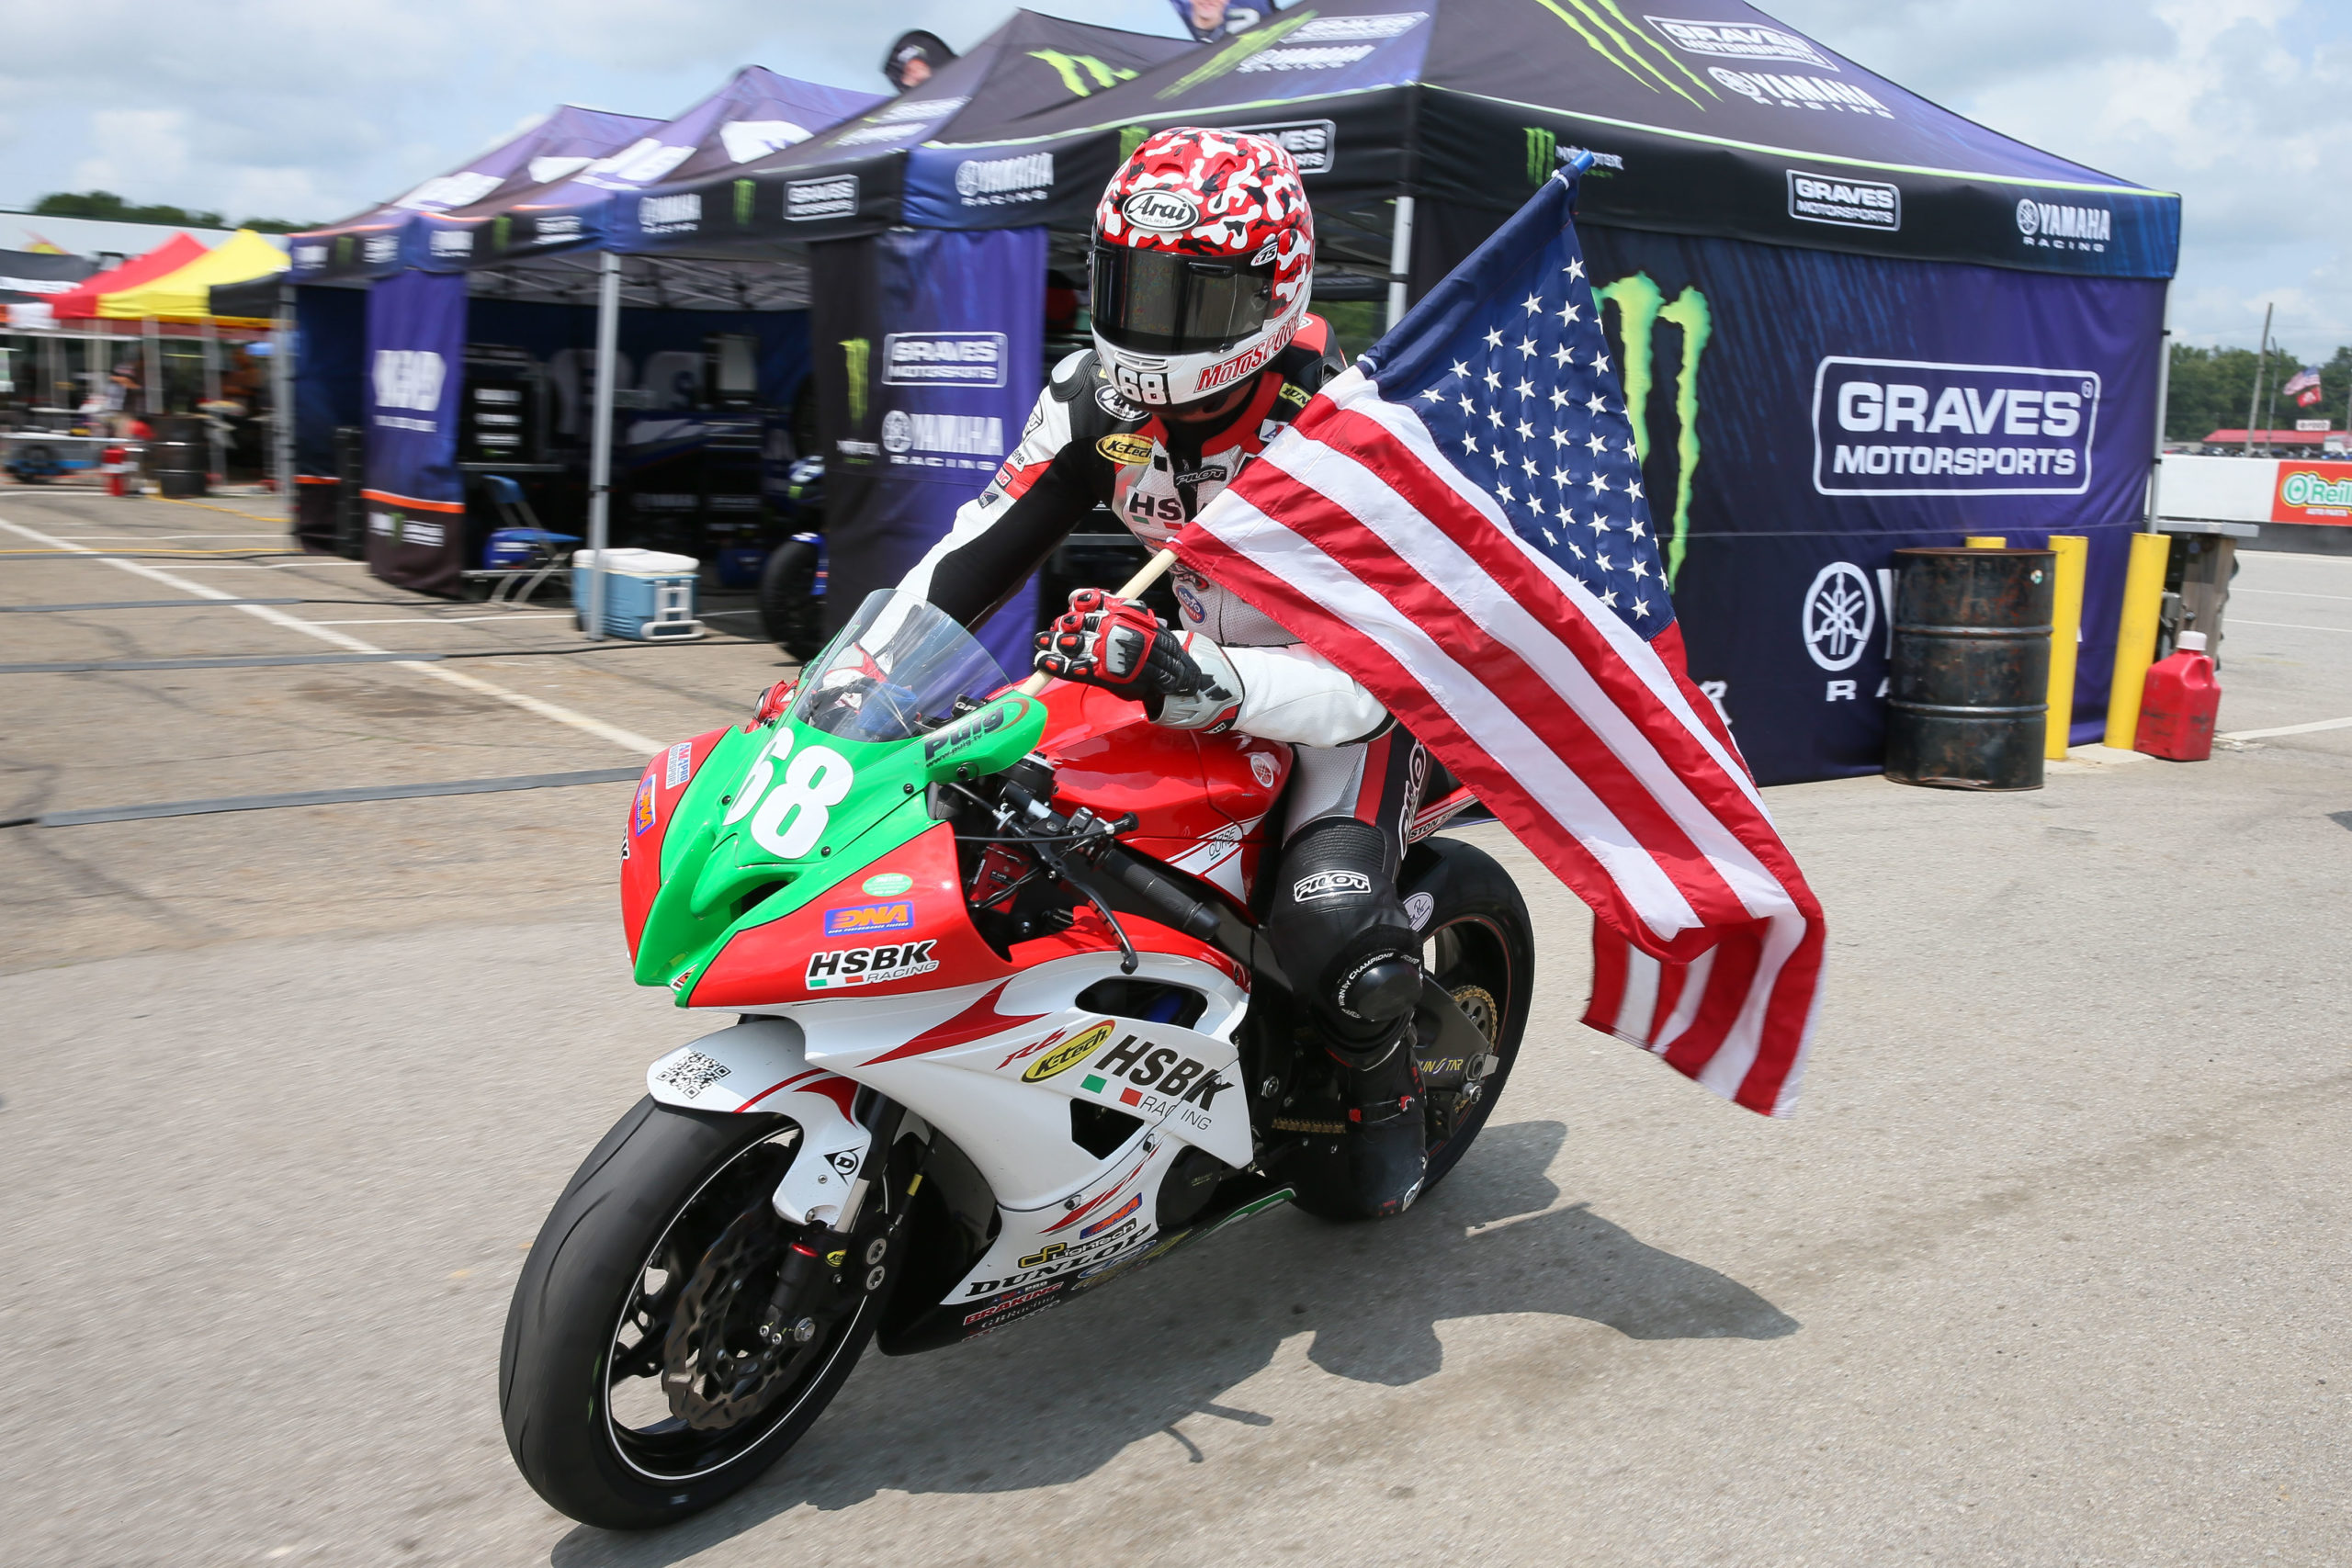 HSBK RACING’S DOMINGUEZ TAKES DOUBLE RACE WINS IN AMA PRO SUPERSPORT AT MID-OHIO